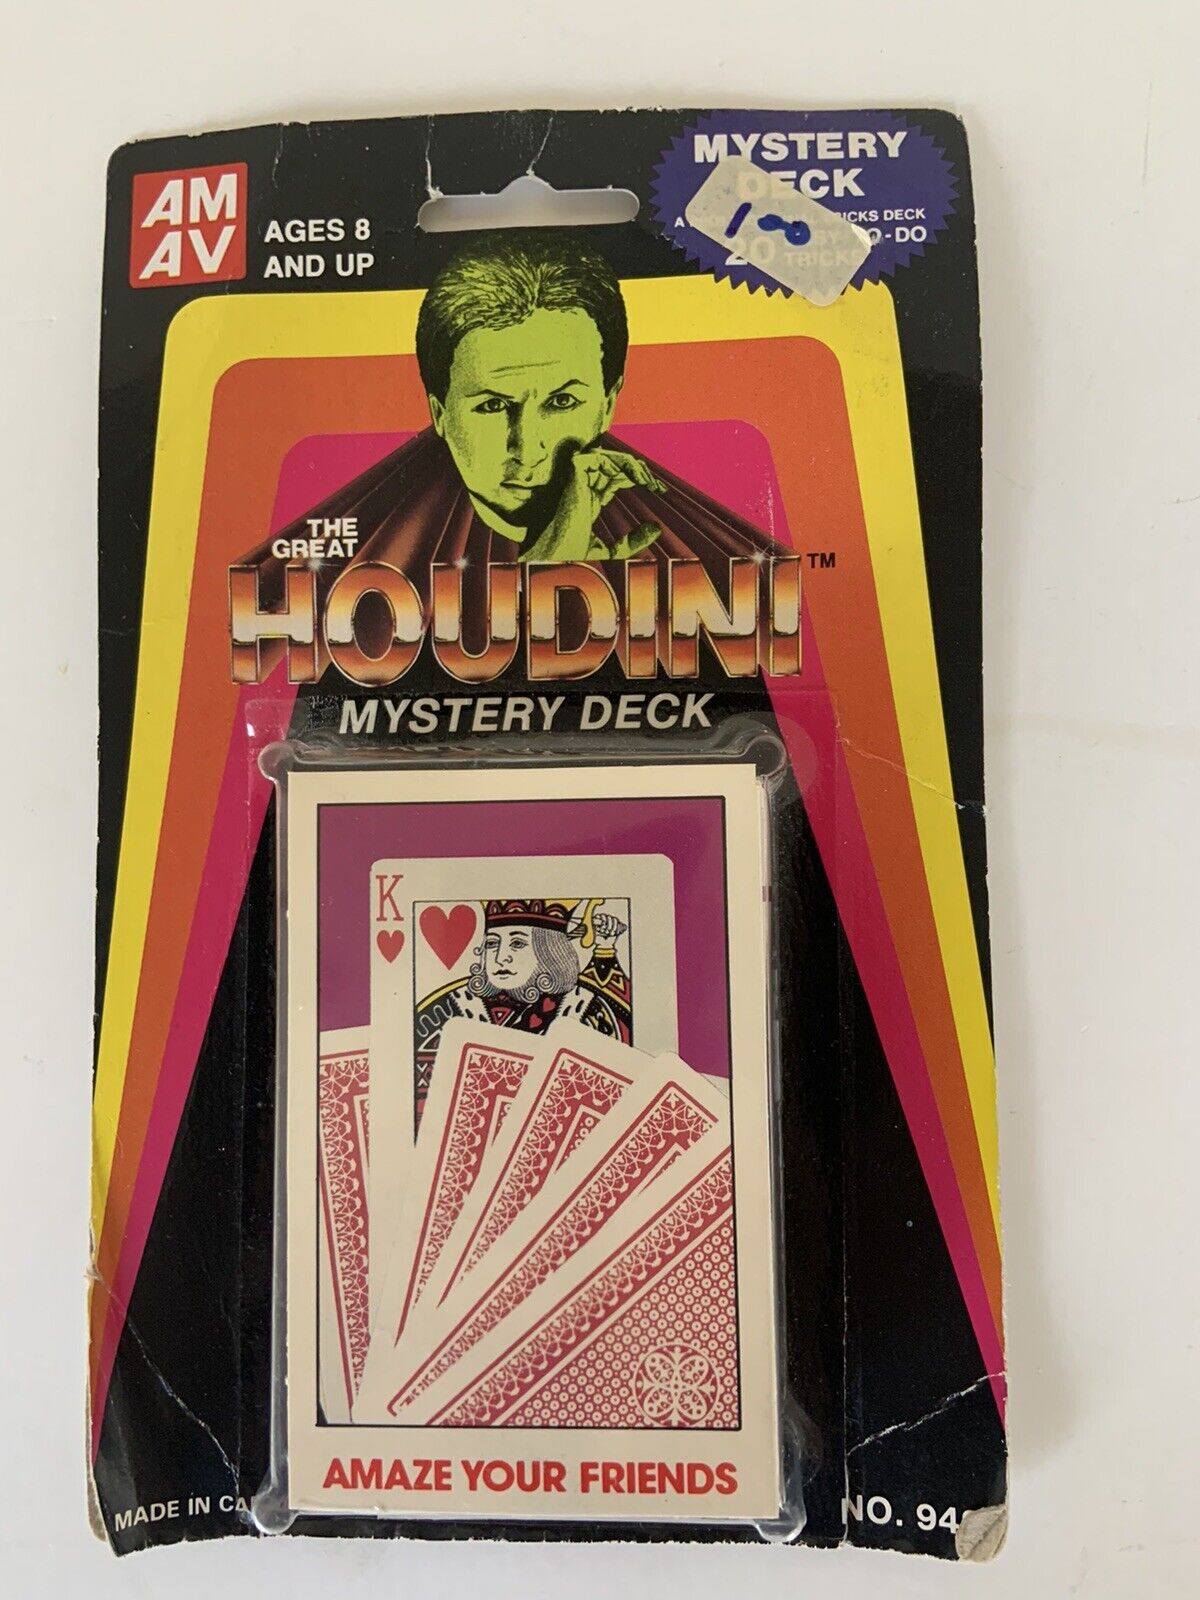 Rare The Great Houdini Mystery Deck “A Very Tricky Deck Of Cards” NO.932$drop